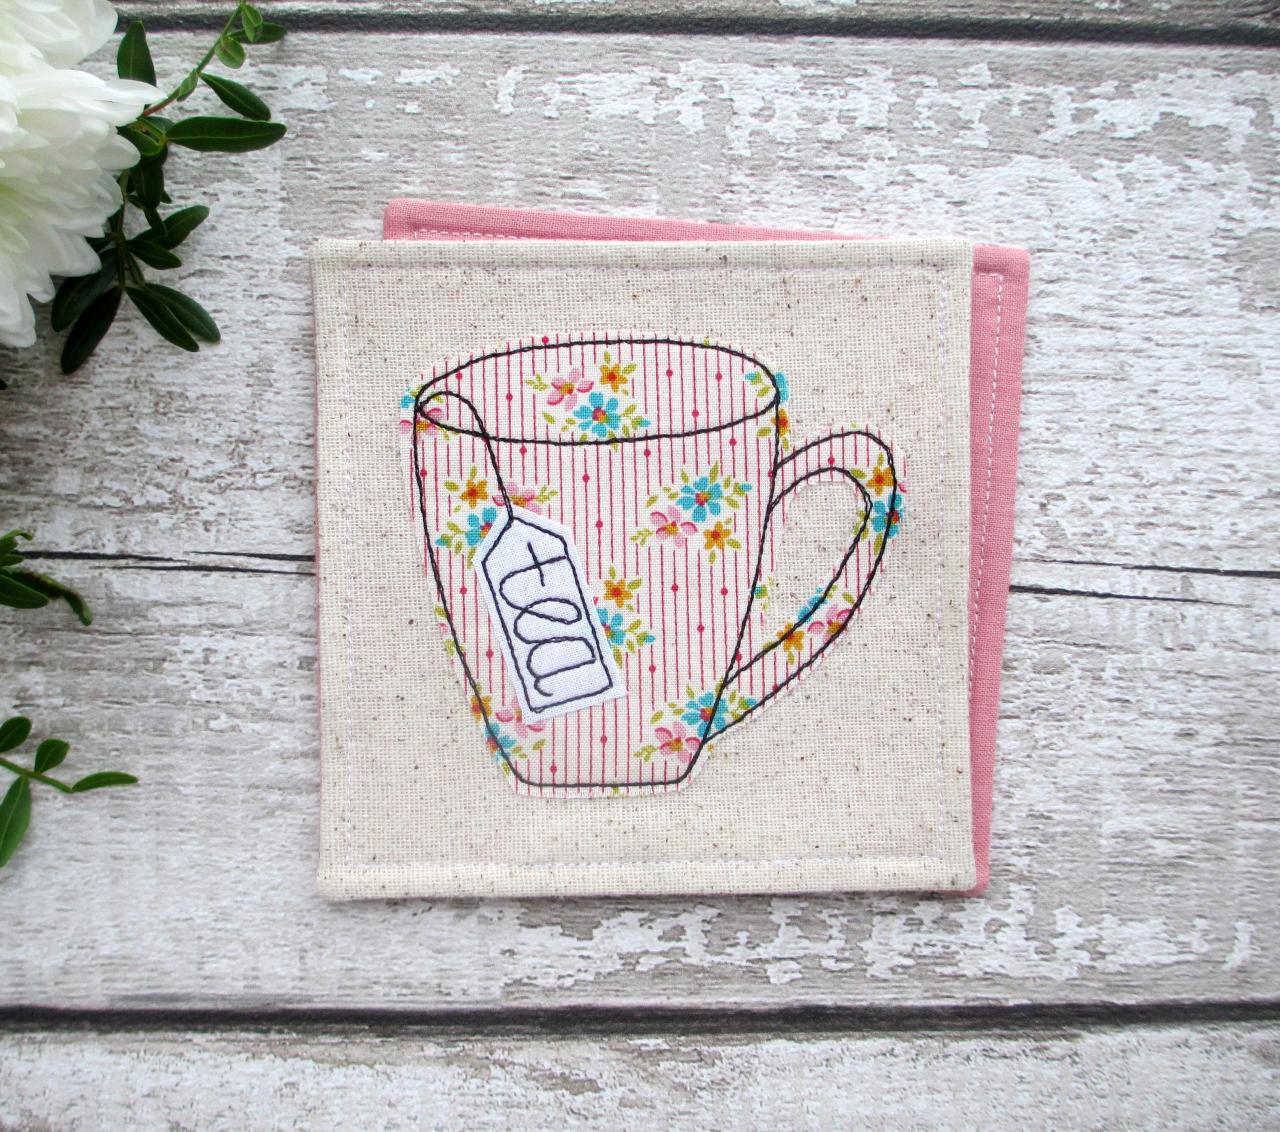 Fabric Tea Coaster, Birthday Gift For A Tea Lover, Coffee Table Decor, Kitchen Gift, Coasters For Drinks, Retirement Gift